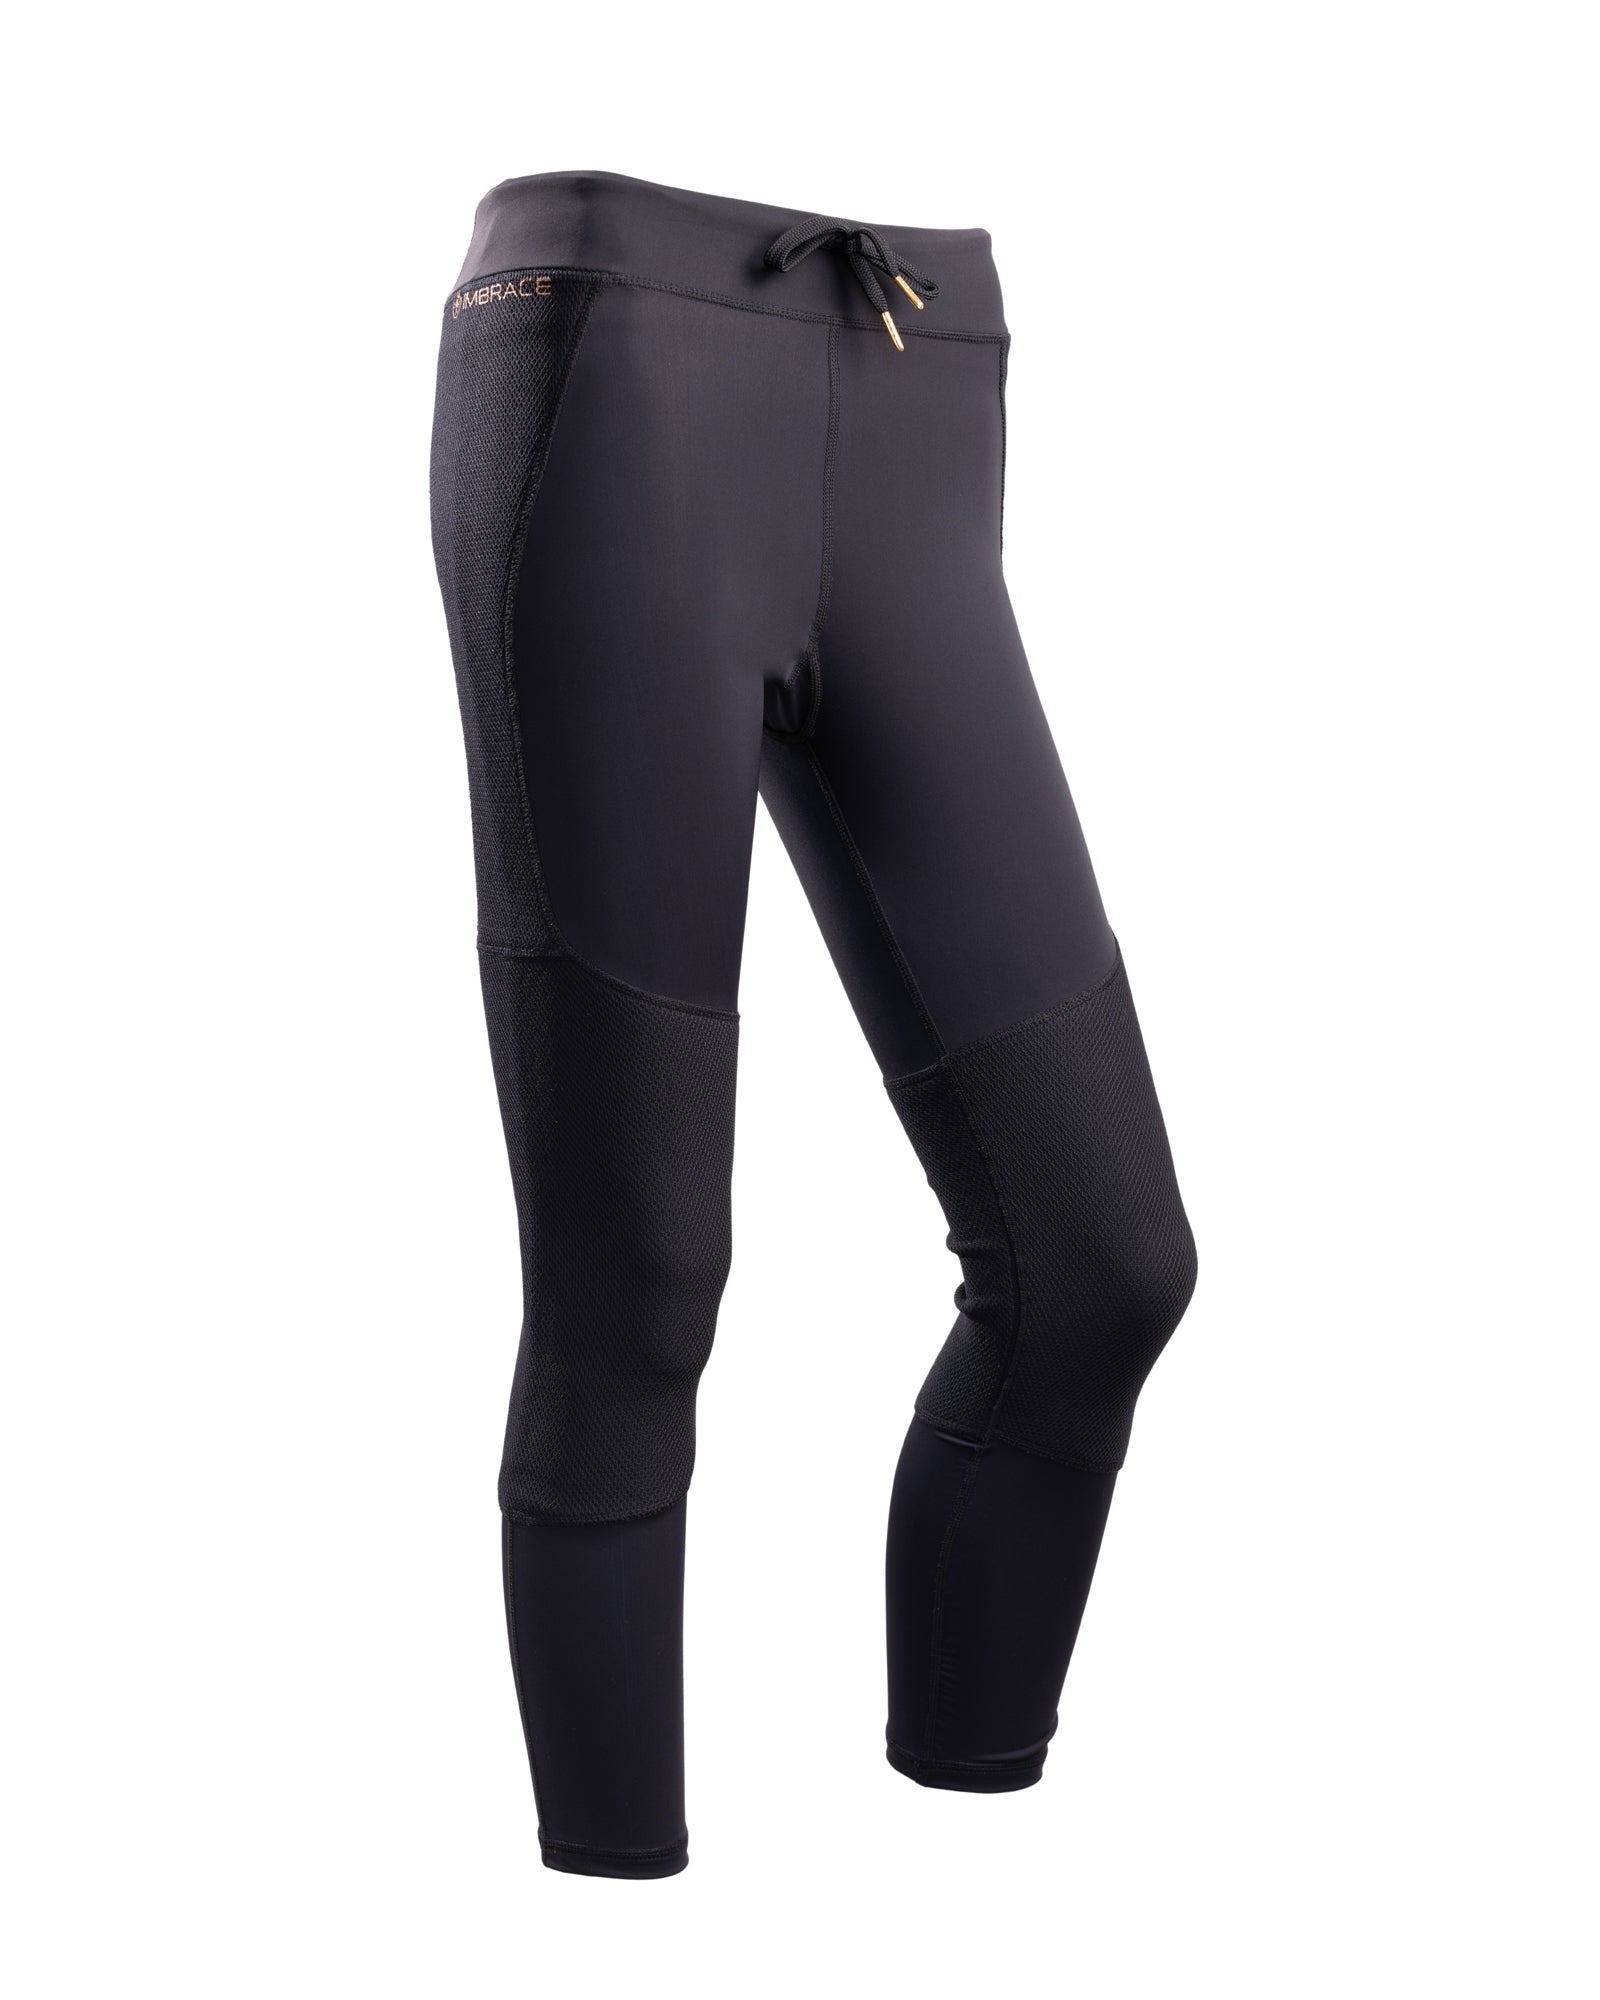 Women's Dynamic Mid Waist Active Recovery Legging